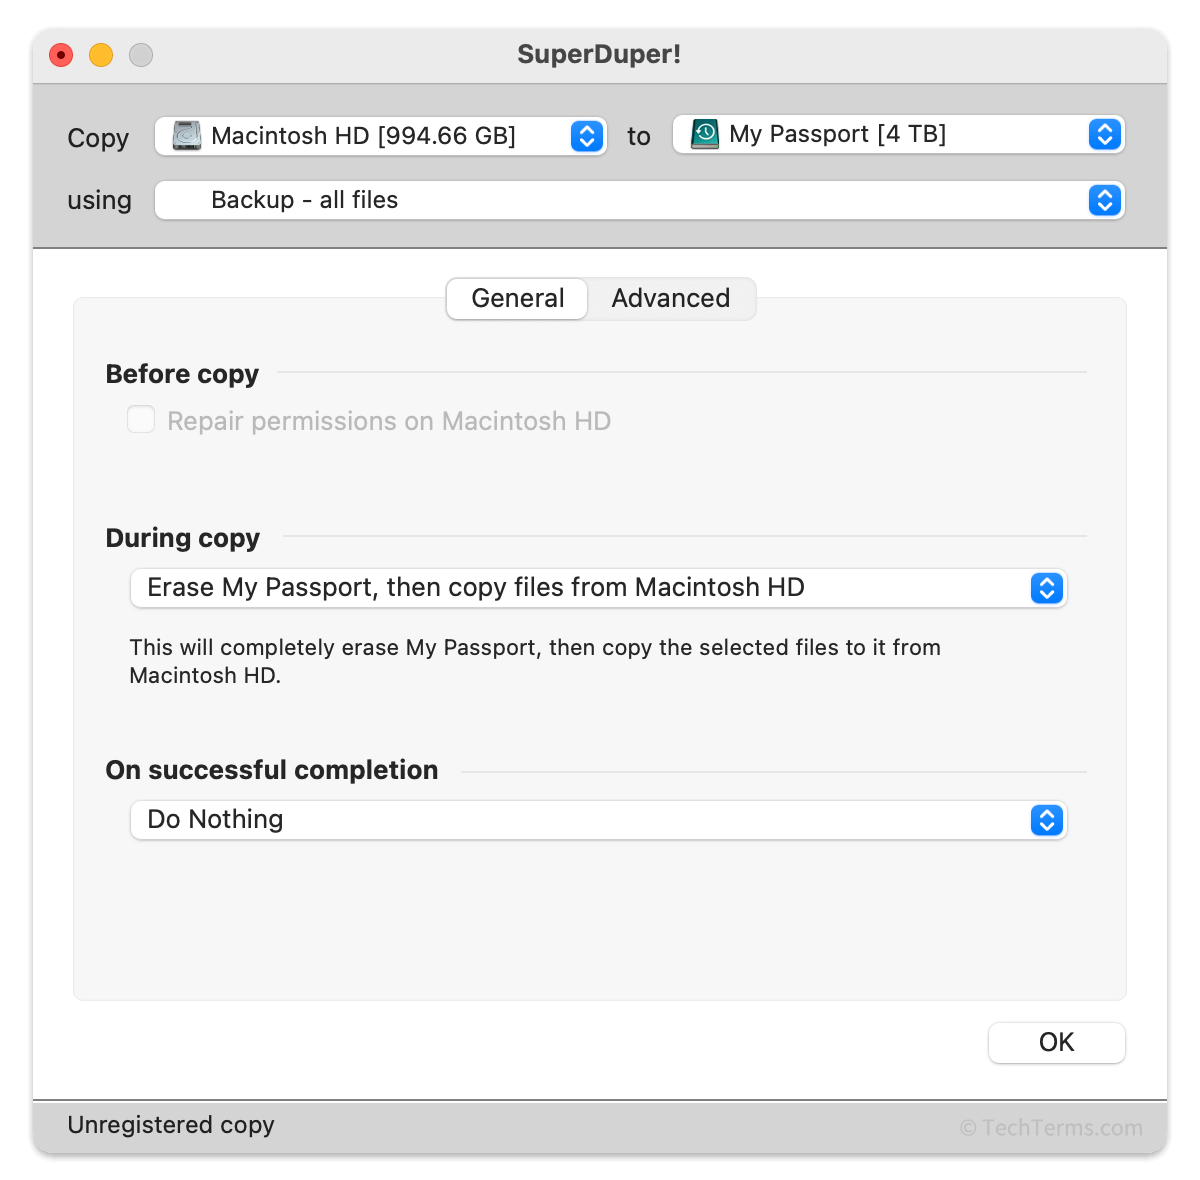 SuperDuper! is a disk cloning utility for macOS